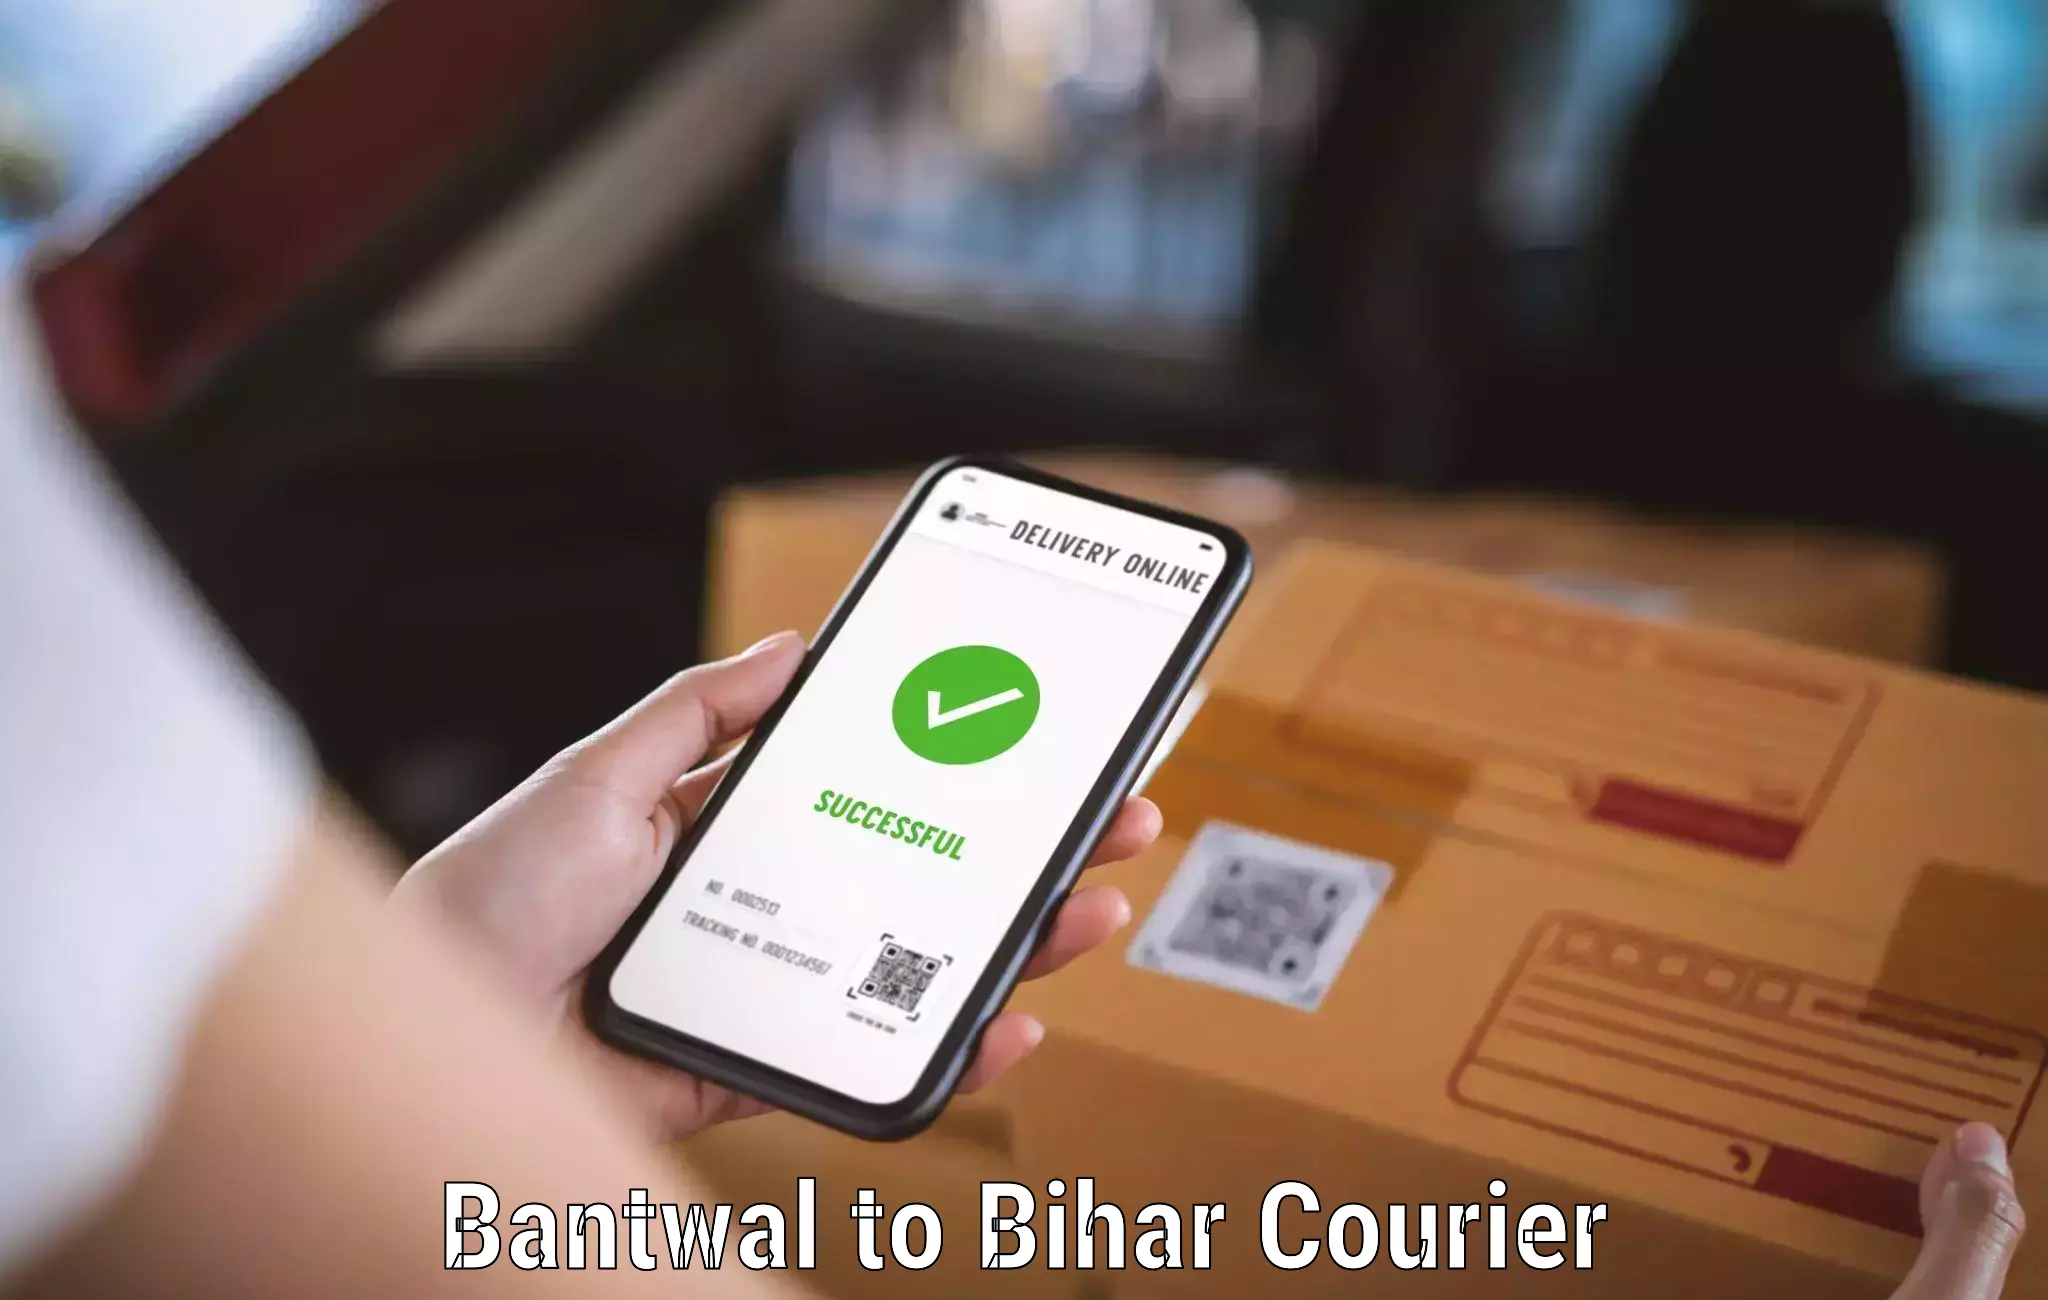 24-hour courier service Bantwal to Mohammadpur